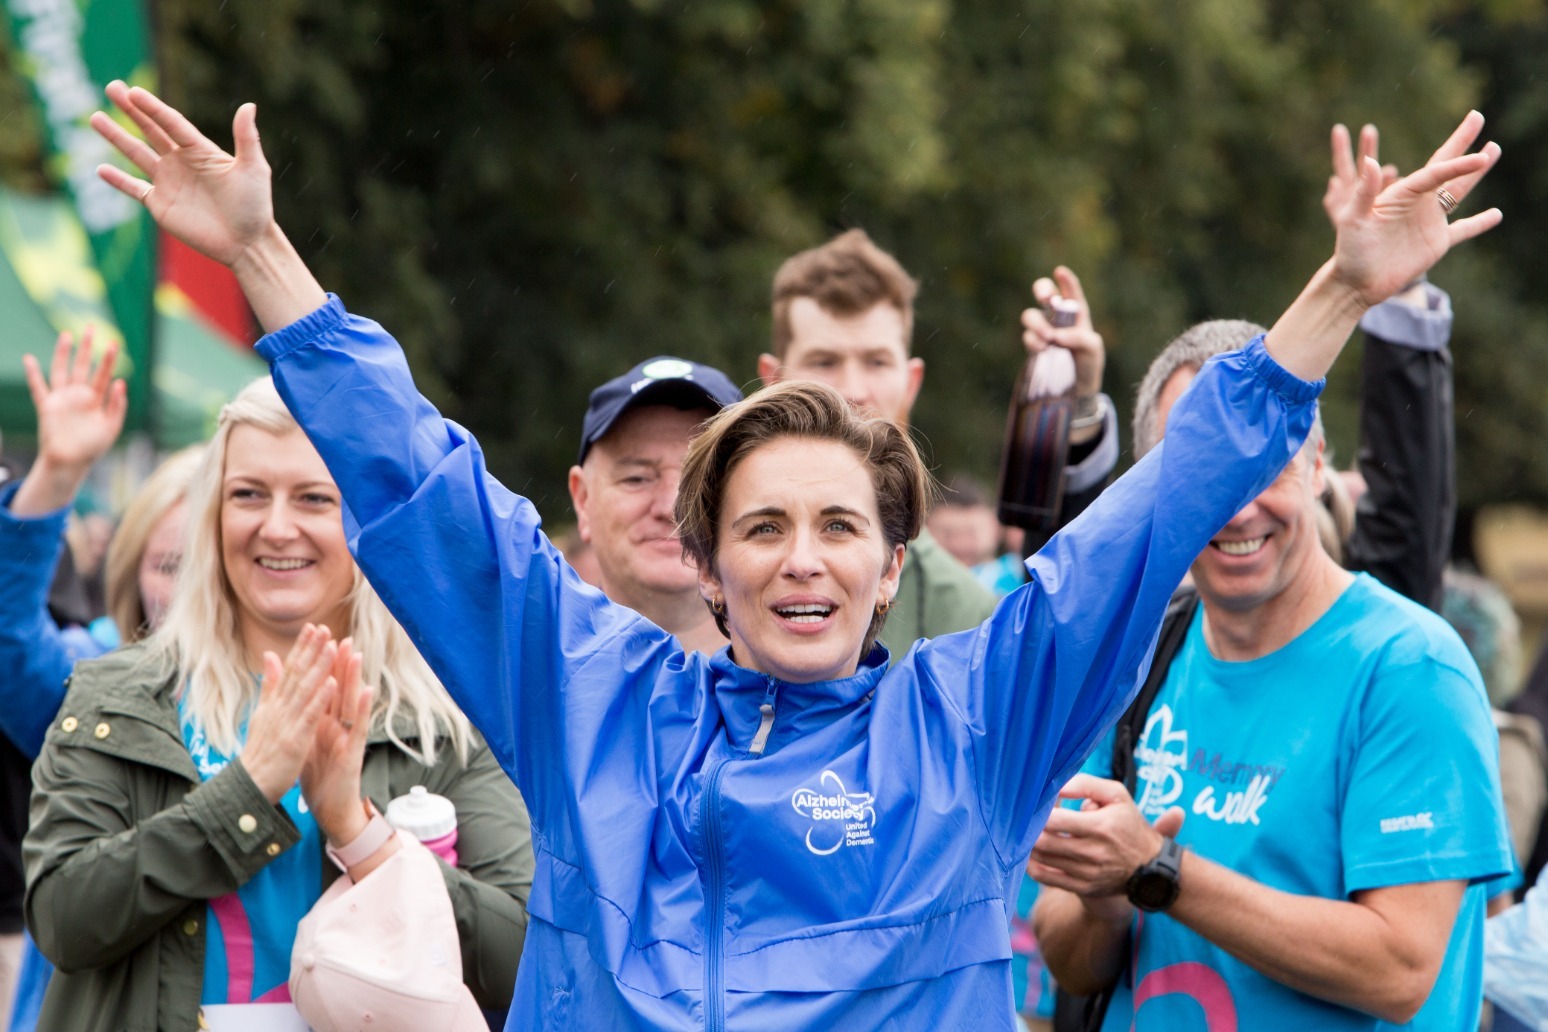 Line of Duty star Vicky McClure takes part in ’emotional’ dementia walk 